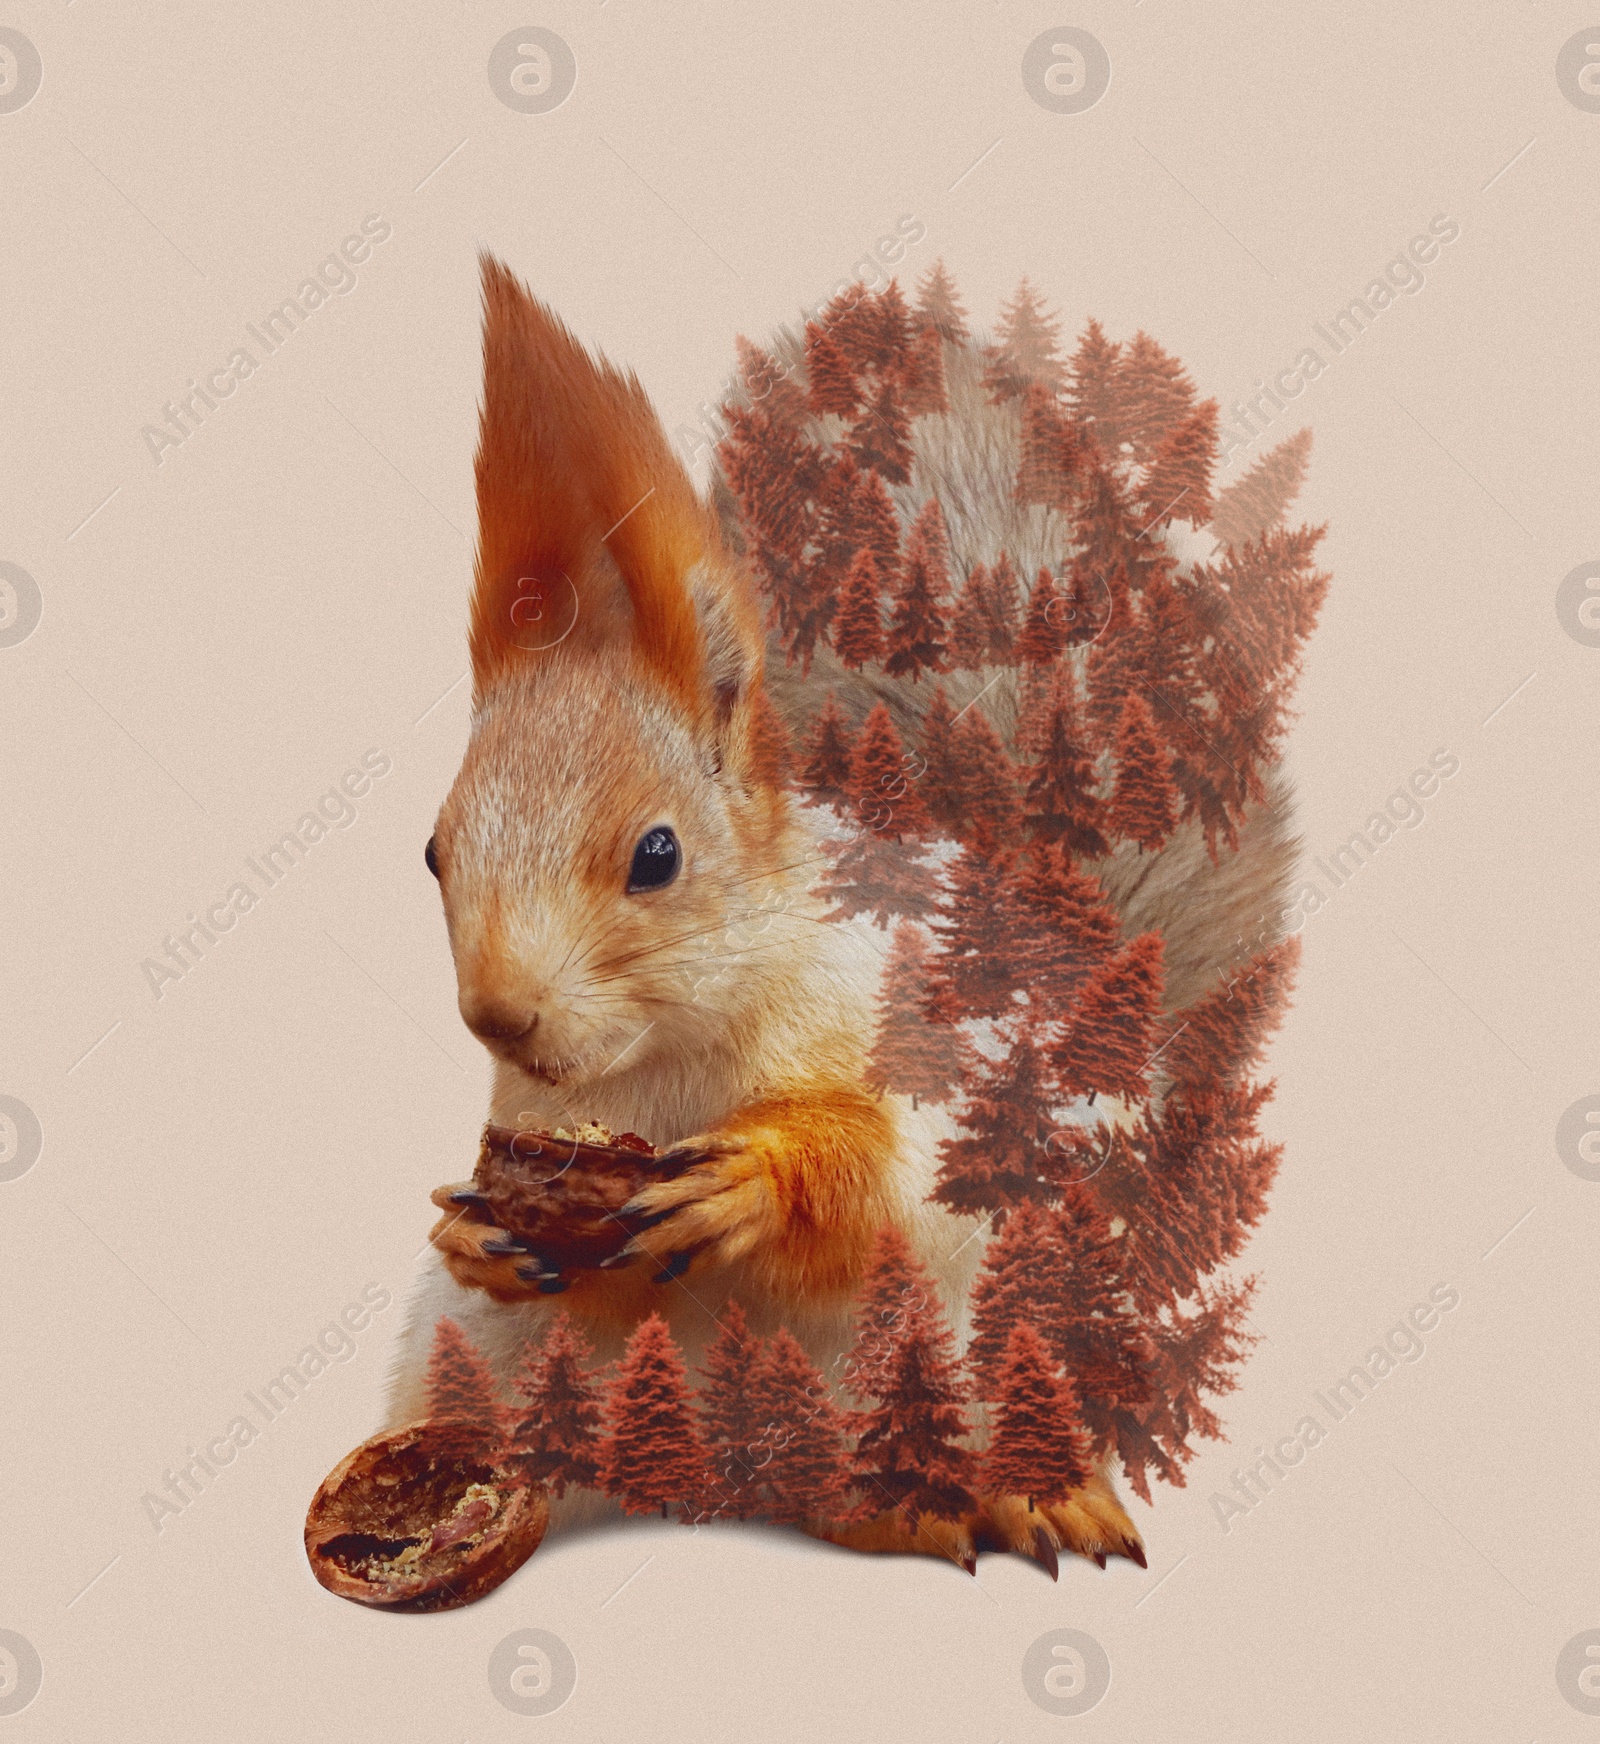 Image of Double exposure of cute squirrel and evergreen fir trees